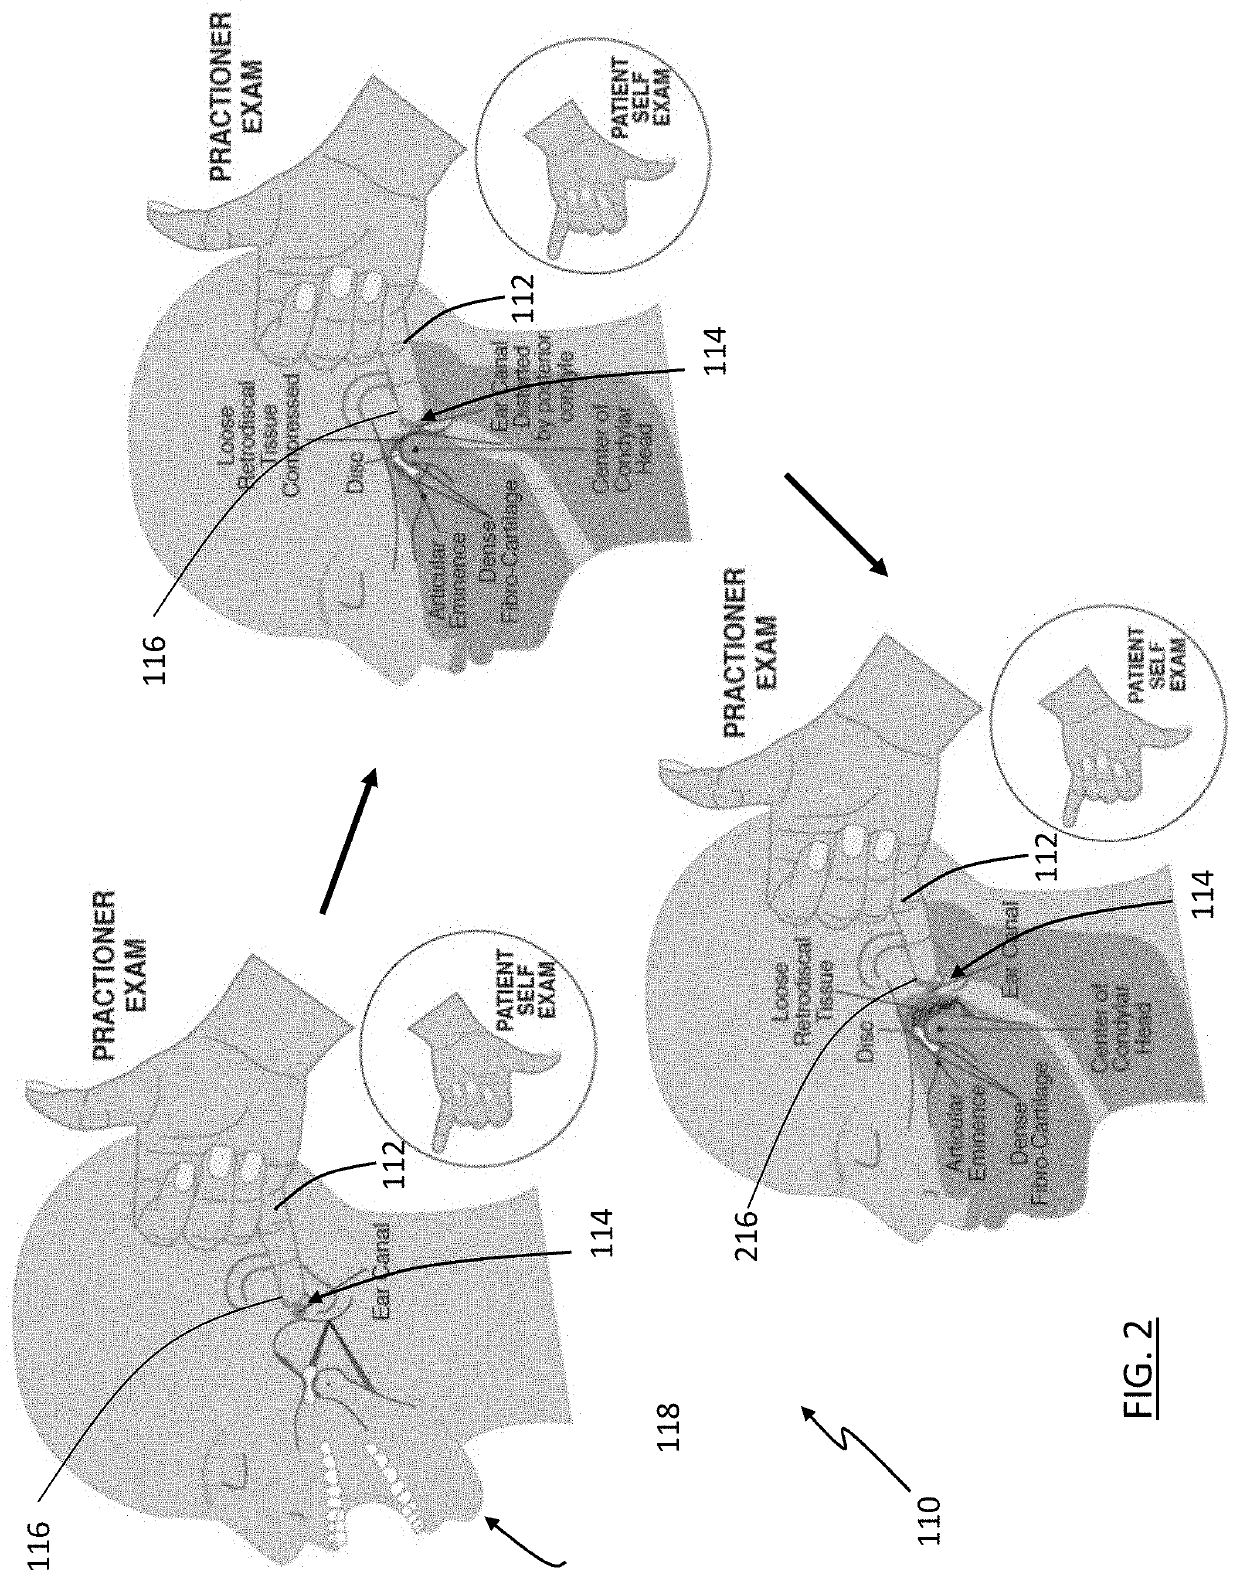 Systems, apparatuses, and methods for diagnosis and treatment of temporomandibular disorders (TMD)